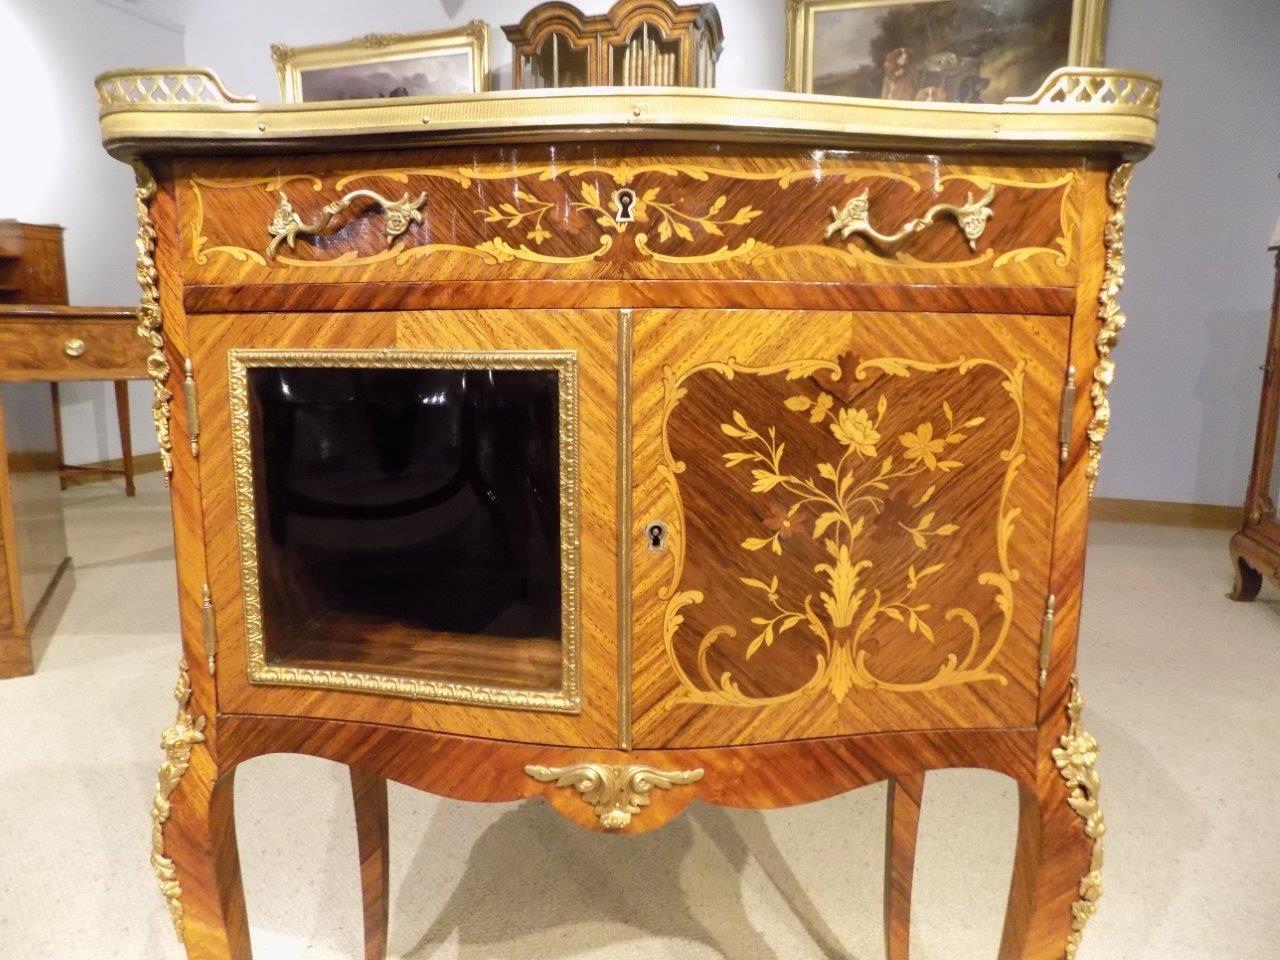 A Kingwood and Marquetry inlaid French side cabinet. The serpentine shaped top with a breche de lap marble top and a pierced ormolu gallery, above the serpentine mahogany lined drawer and cupboard with fine floral marquetry inlaid detail and a